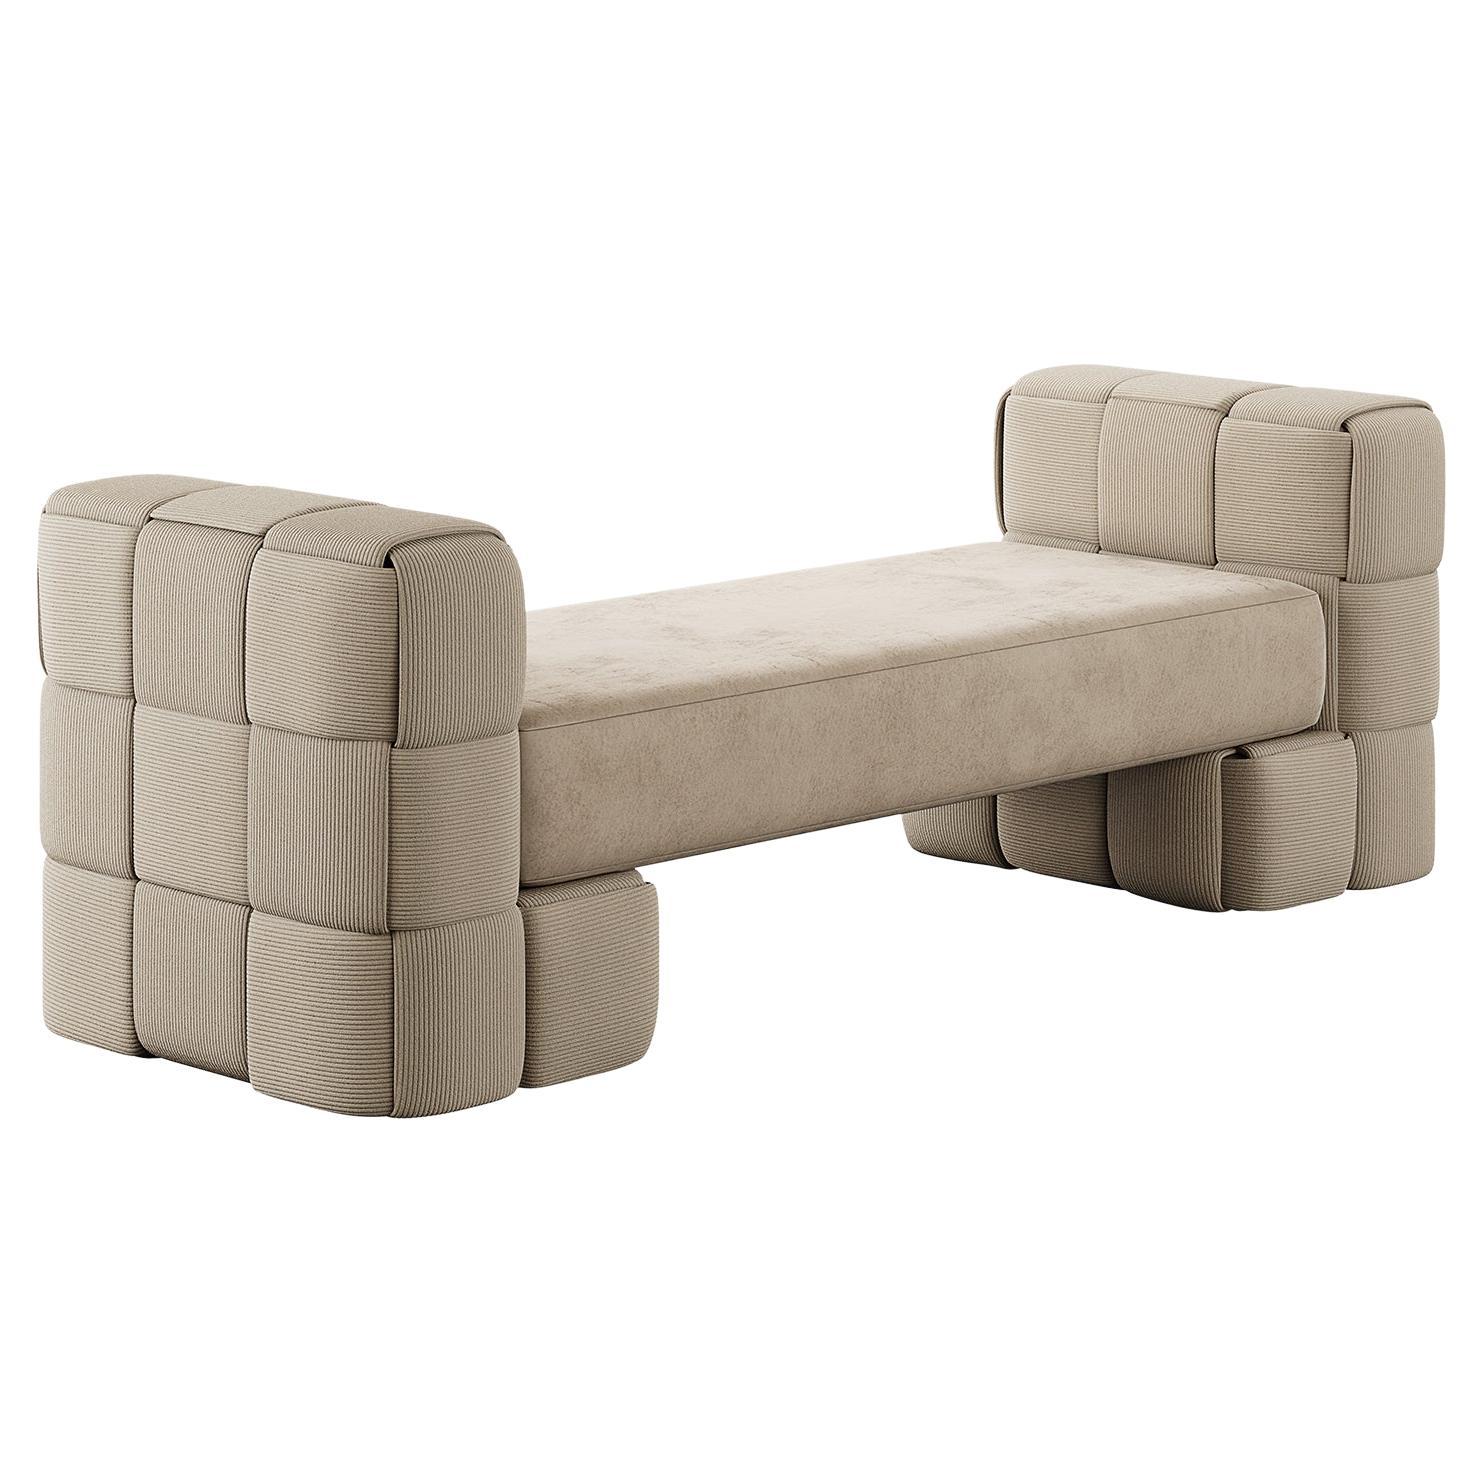 Contemporary Woven Upholstered Bench with Arms Hellbraun Beige Cord